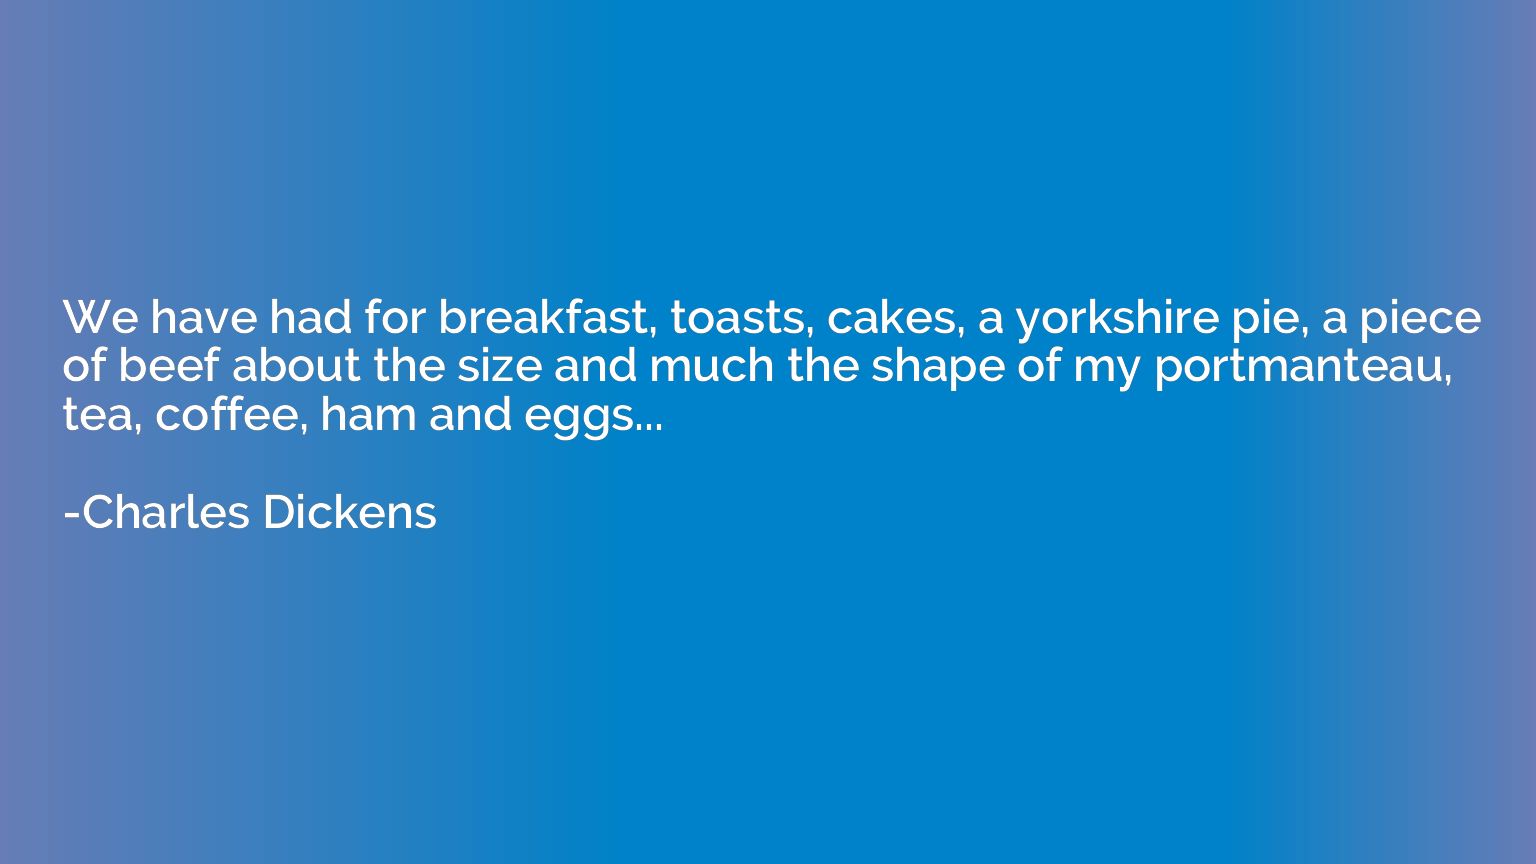 We have had for breakfast, toasts, cakes, a yorkshire pie, a